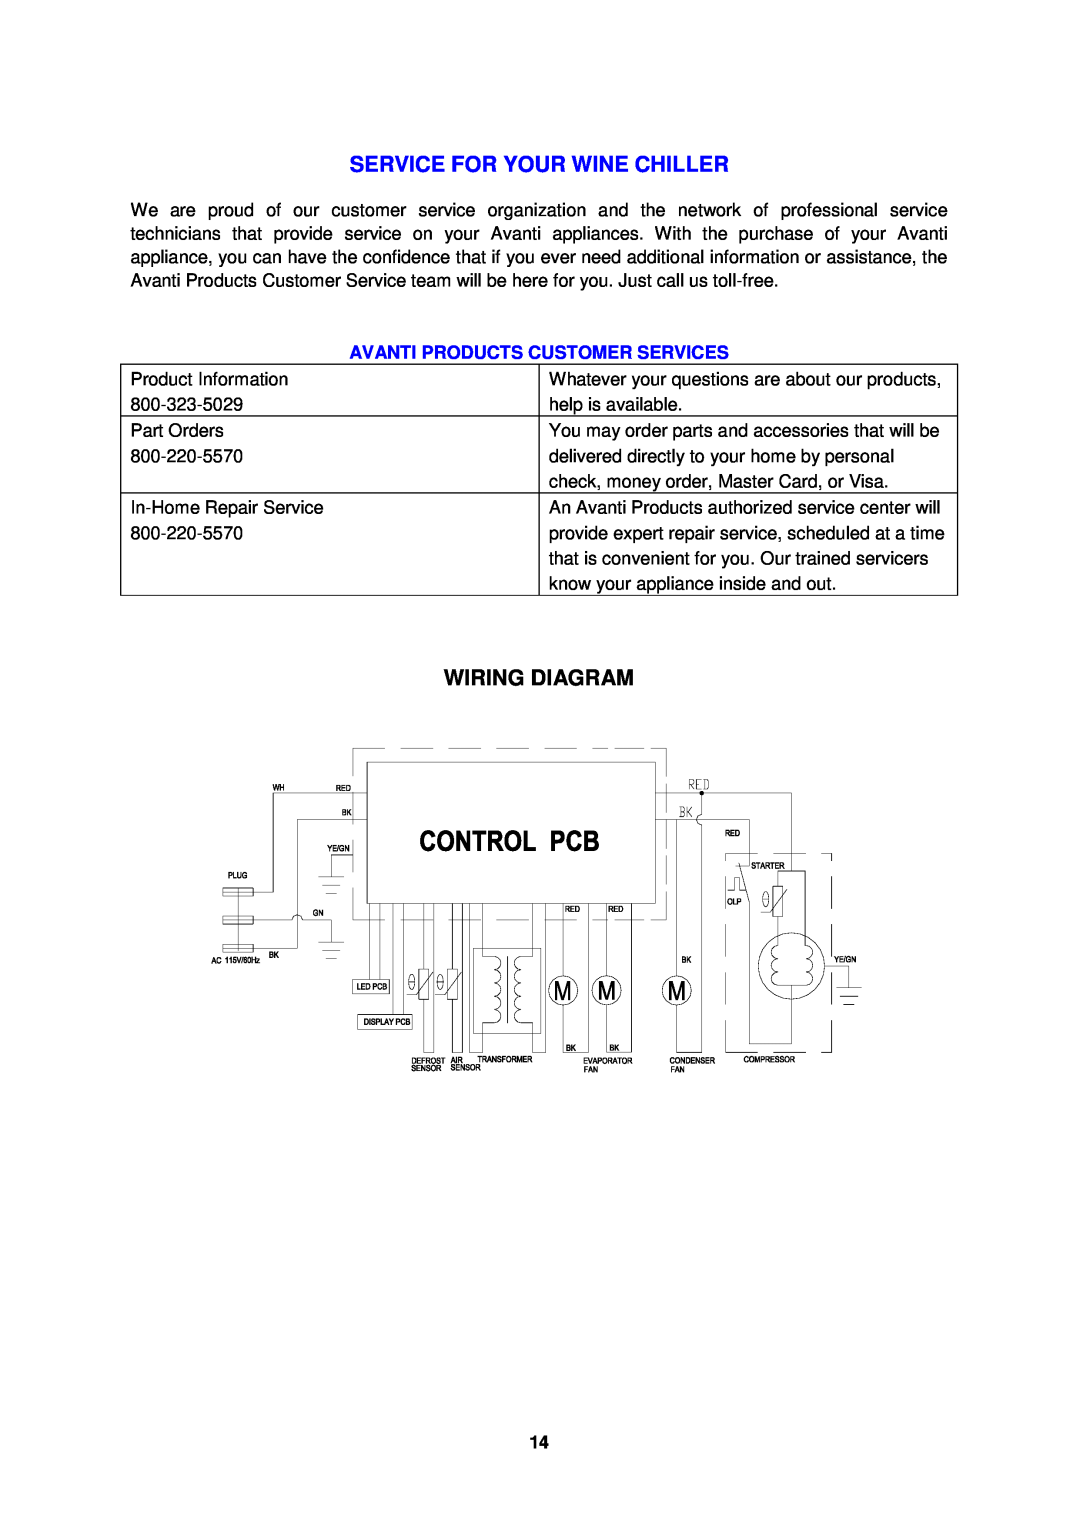 Avanti WCR682SS1 instruction manual Service For Your Wine Chiller, Wiring Diagram, Avanti Products Customer Services 